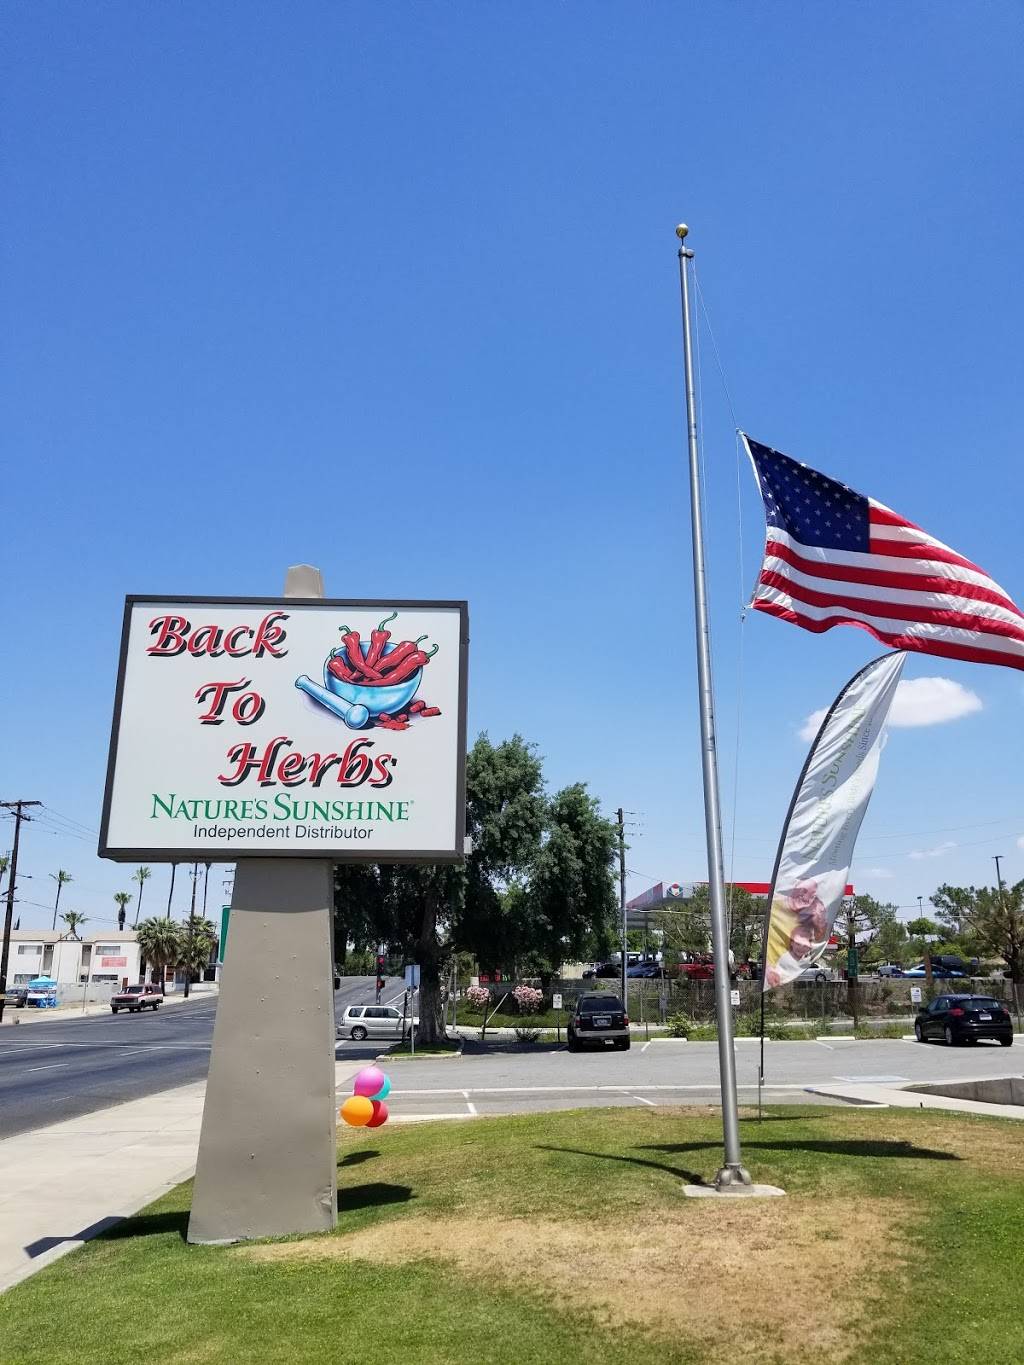 Back To Herbs | Photo 6 of 6 | Address: 2425 Haley St, Bakersfield, CA 93305, USA | Phone: (661) 872-3200